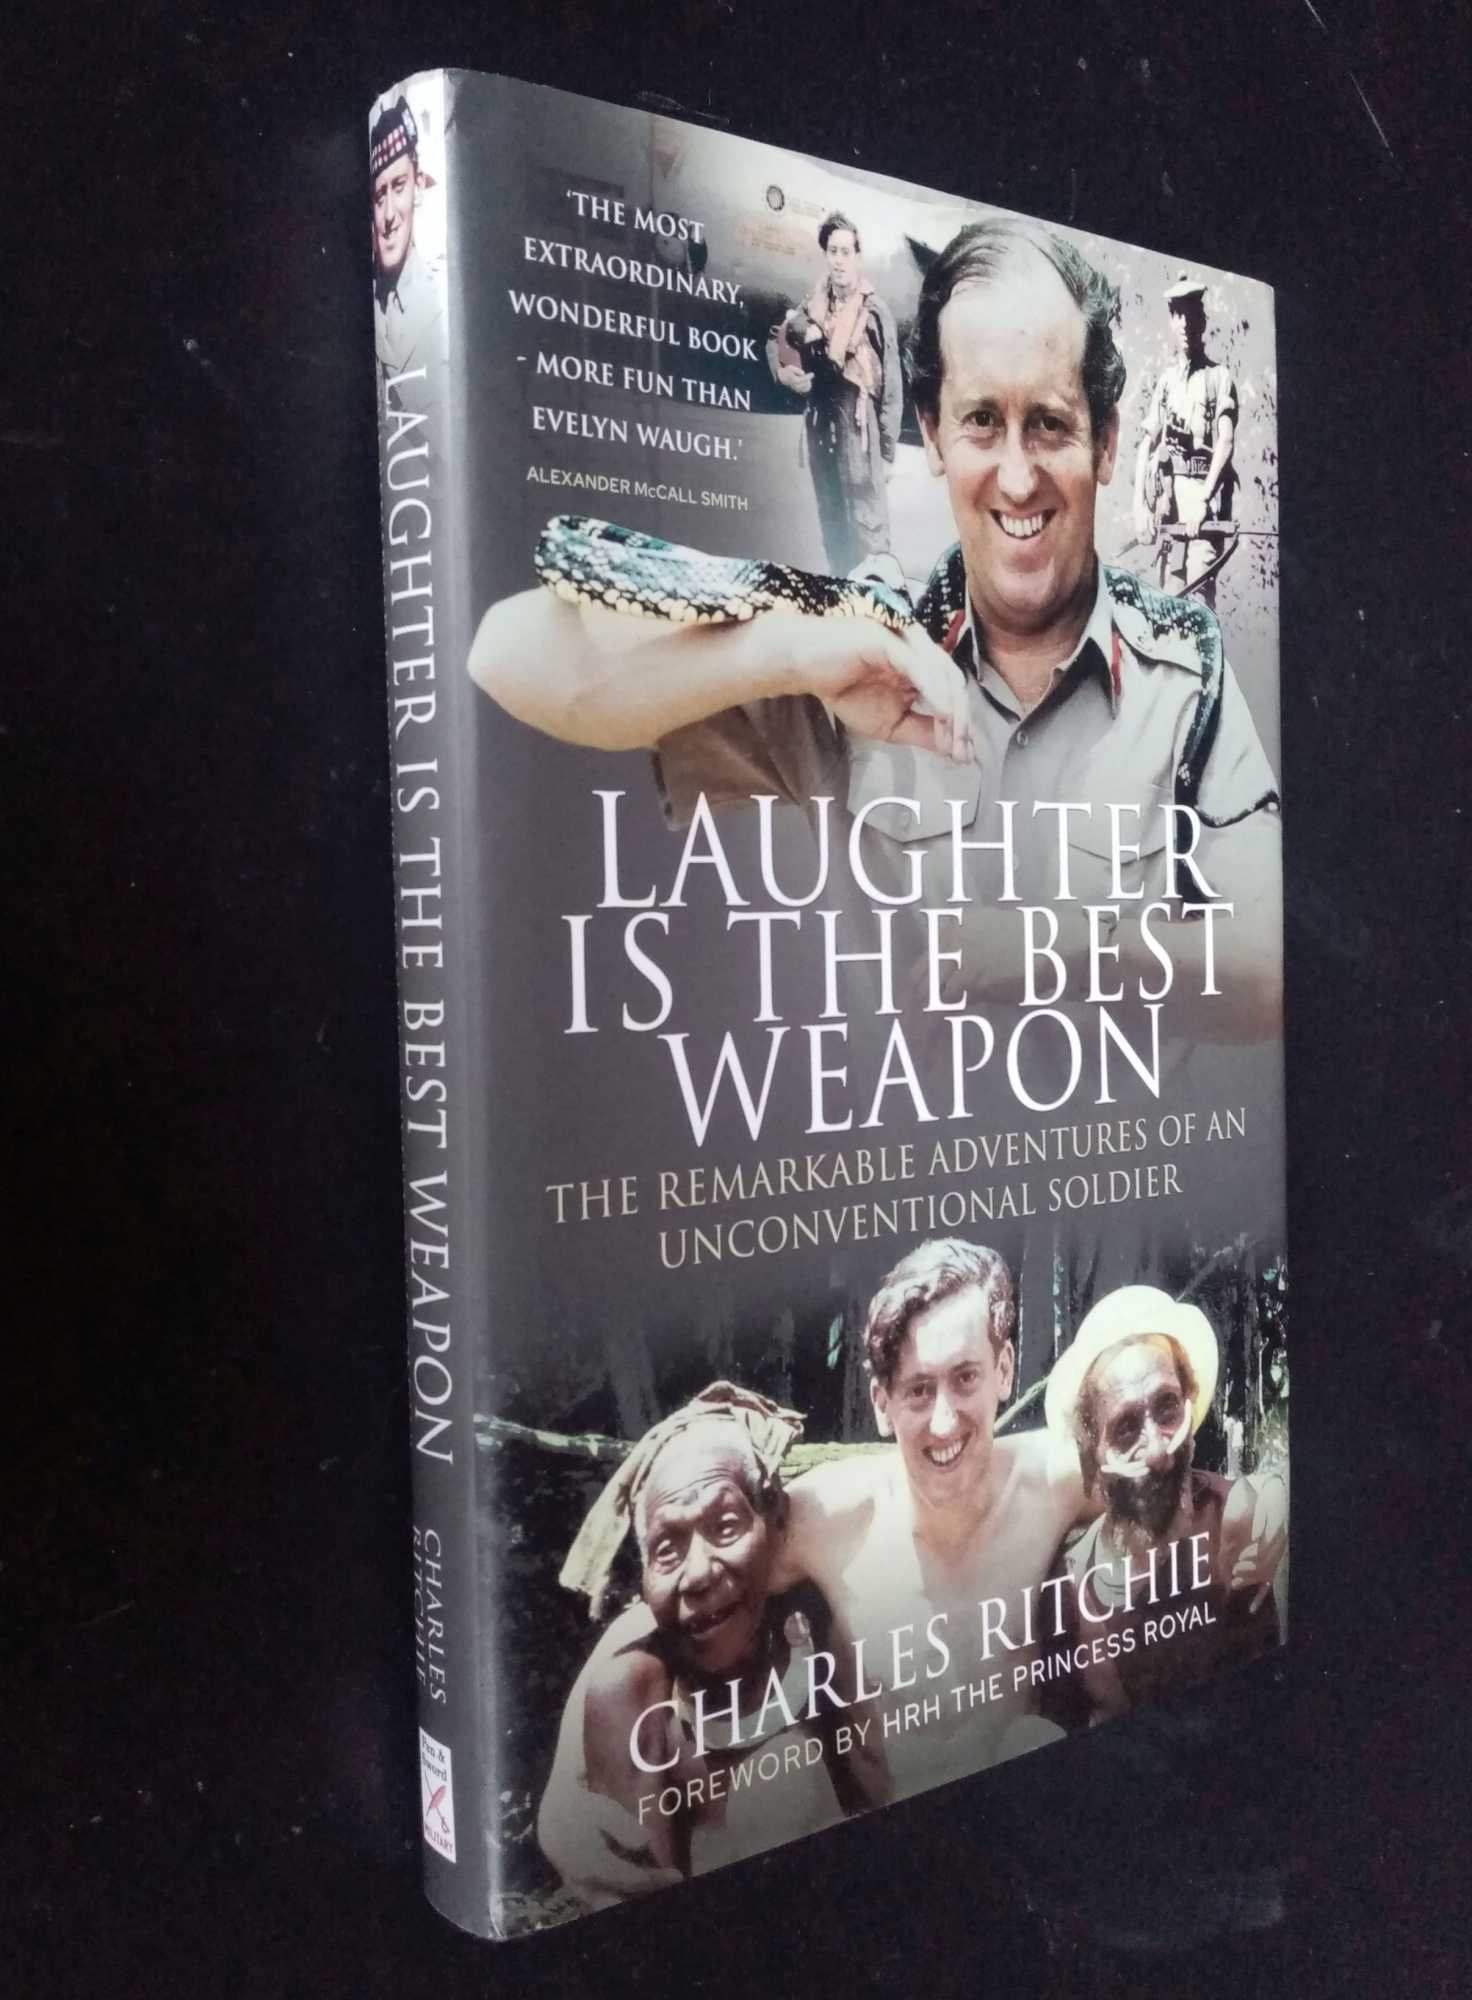 Charles Ritchie - Laughter is the Best Weapon: The Remarkable Adventures of an Unconventional Soldier